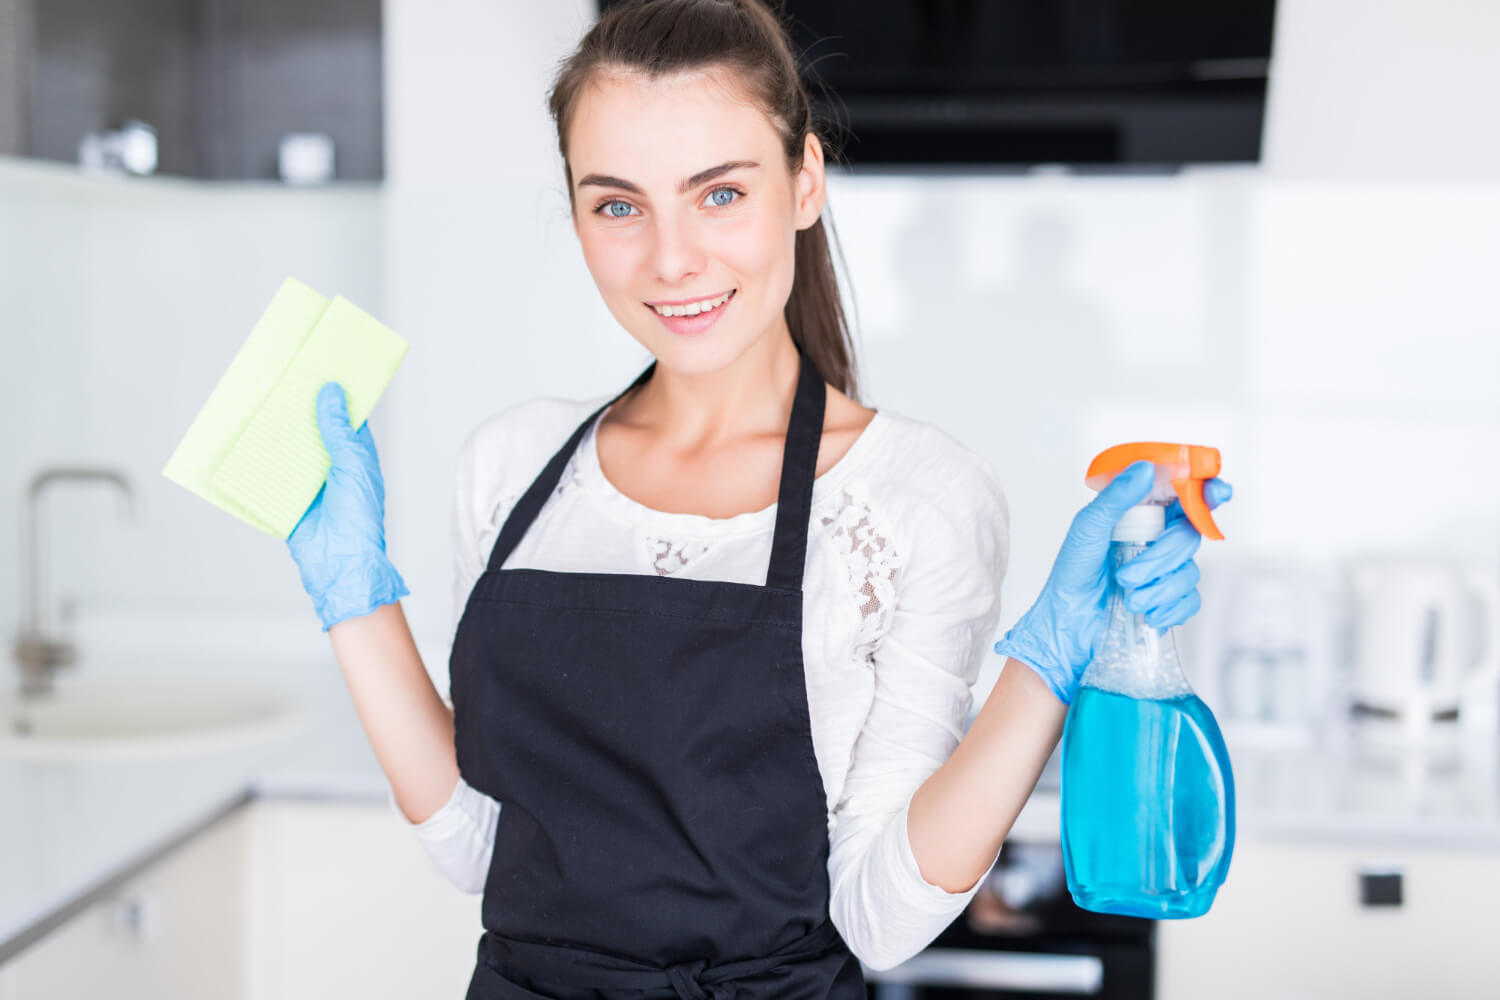 happy browned haired woman with blue eyes and black uniform smiling at camera while holding cleaning spray and cloth